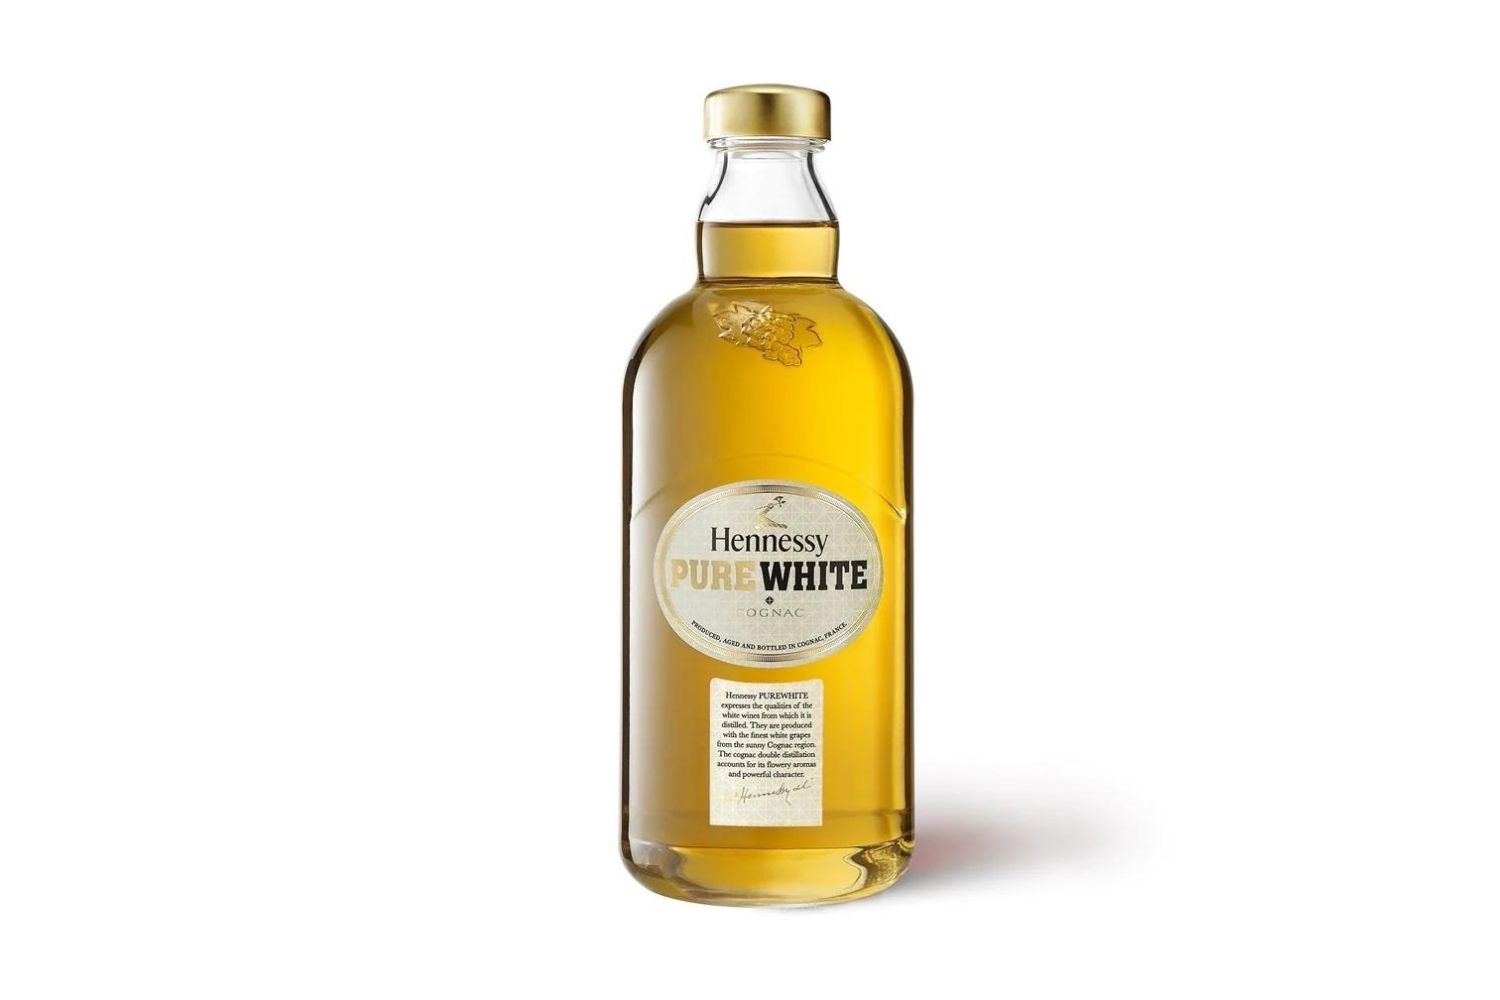 17-enigmatic-facts-about-pure-white-hennessy